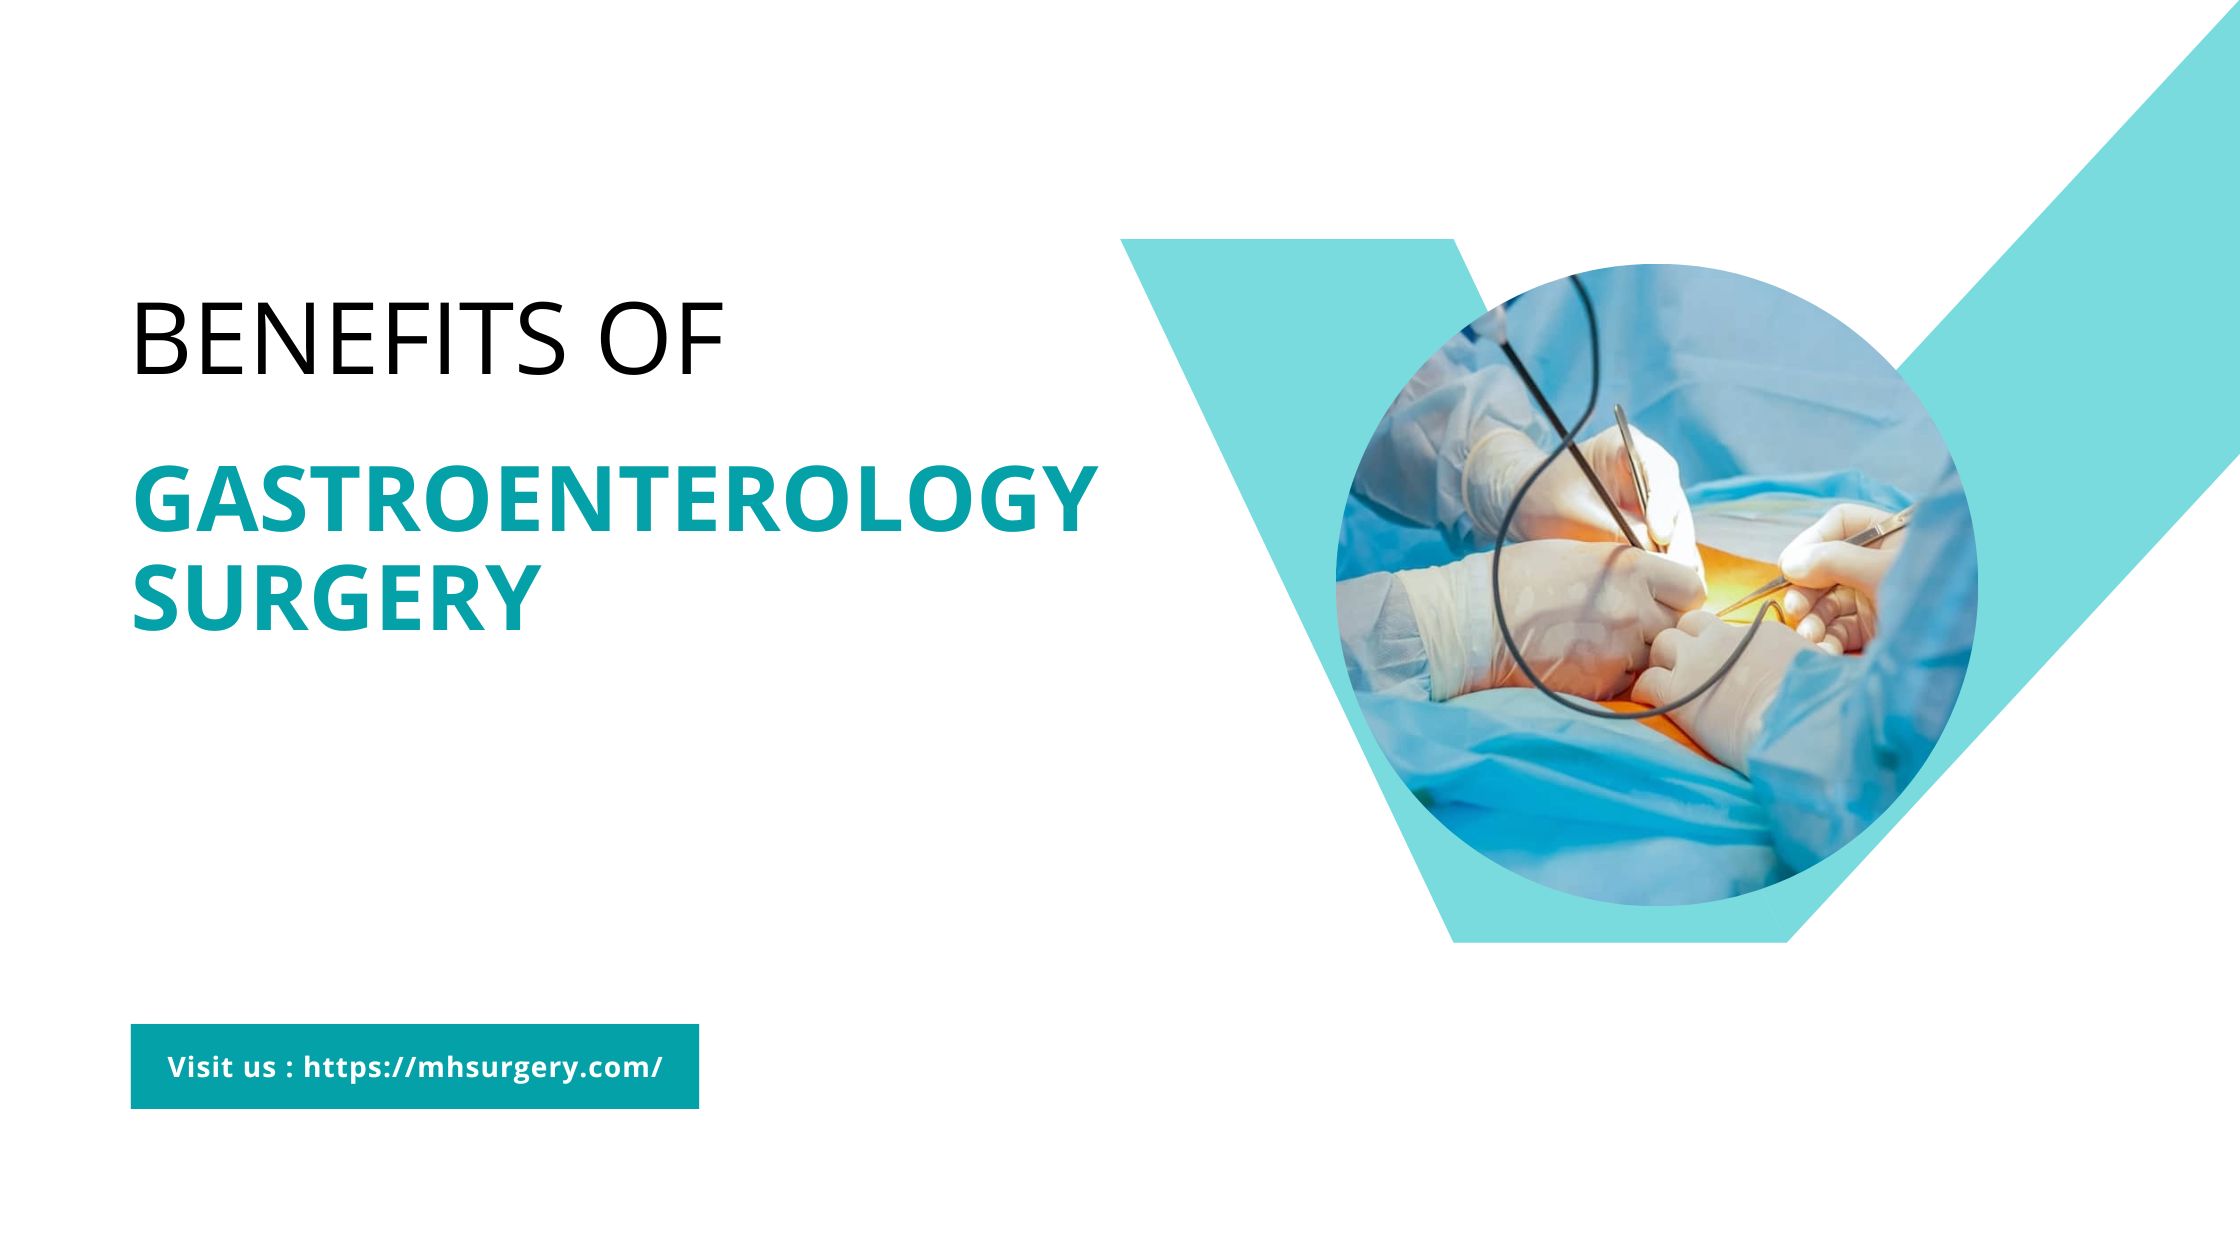 WHAT ARE THE BENEFITS OF GASTROENTEROLOGY SURGERY?